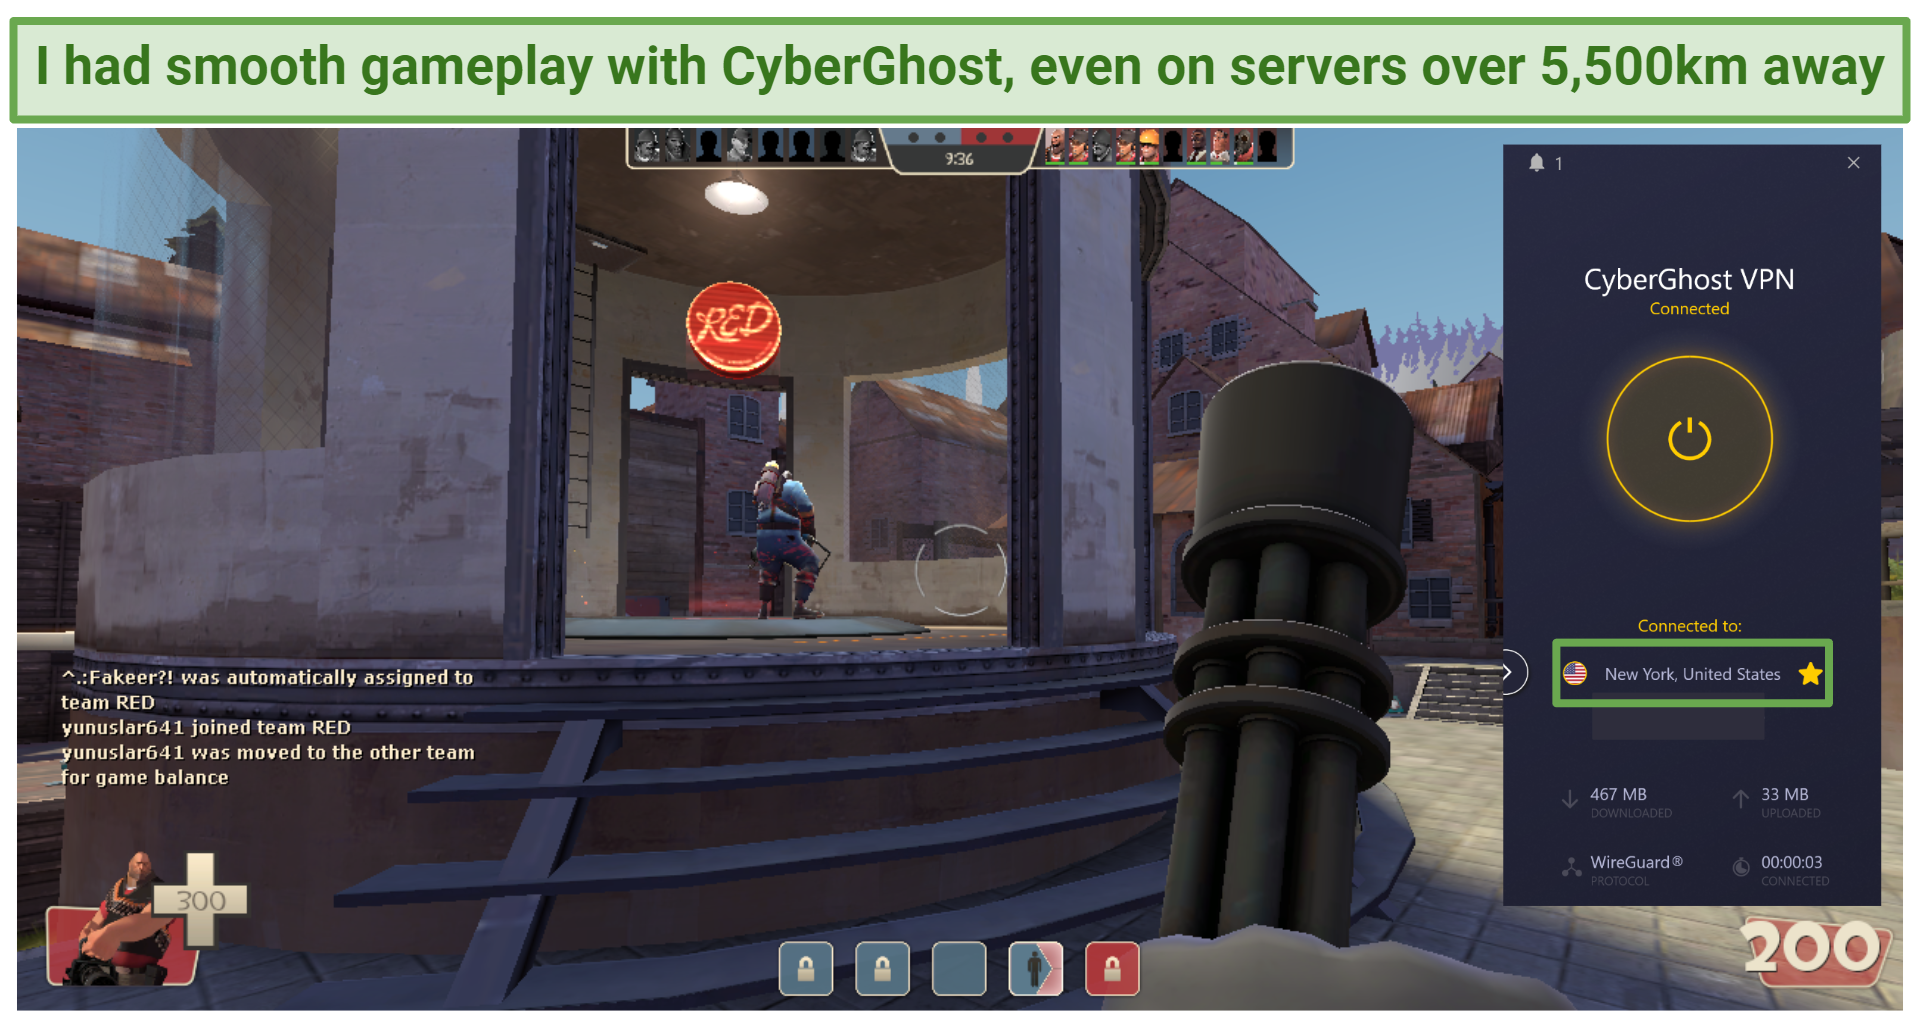 Screenshot of CyberGhost's US gaming servers allowing smooth gaming